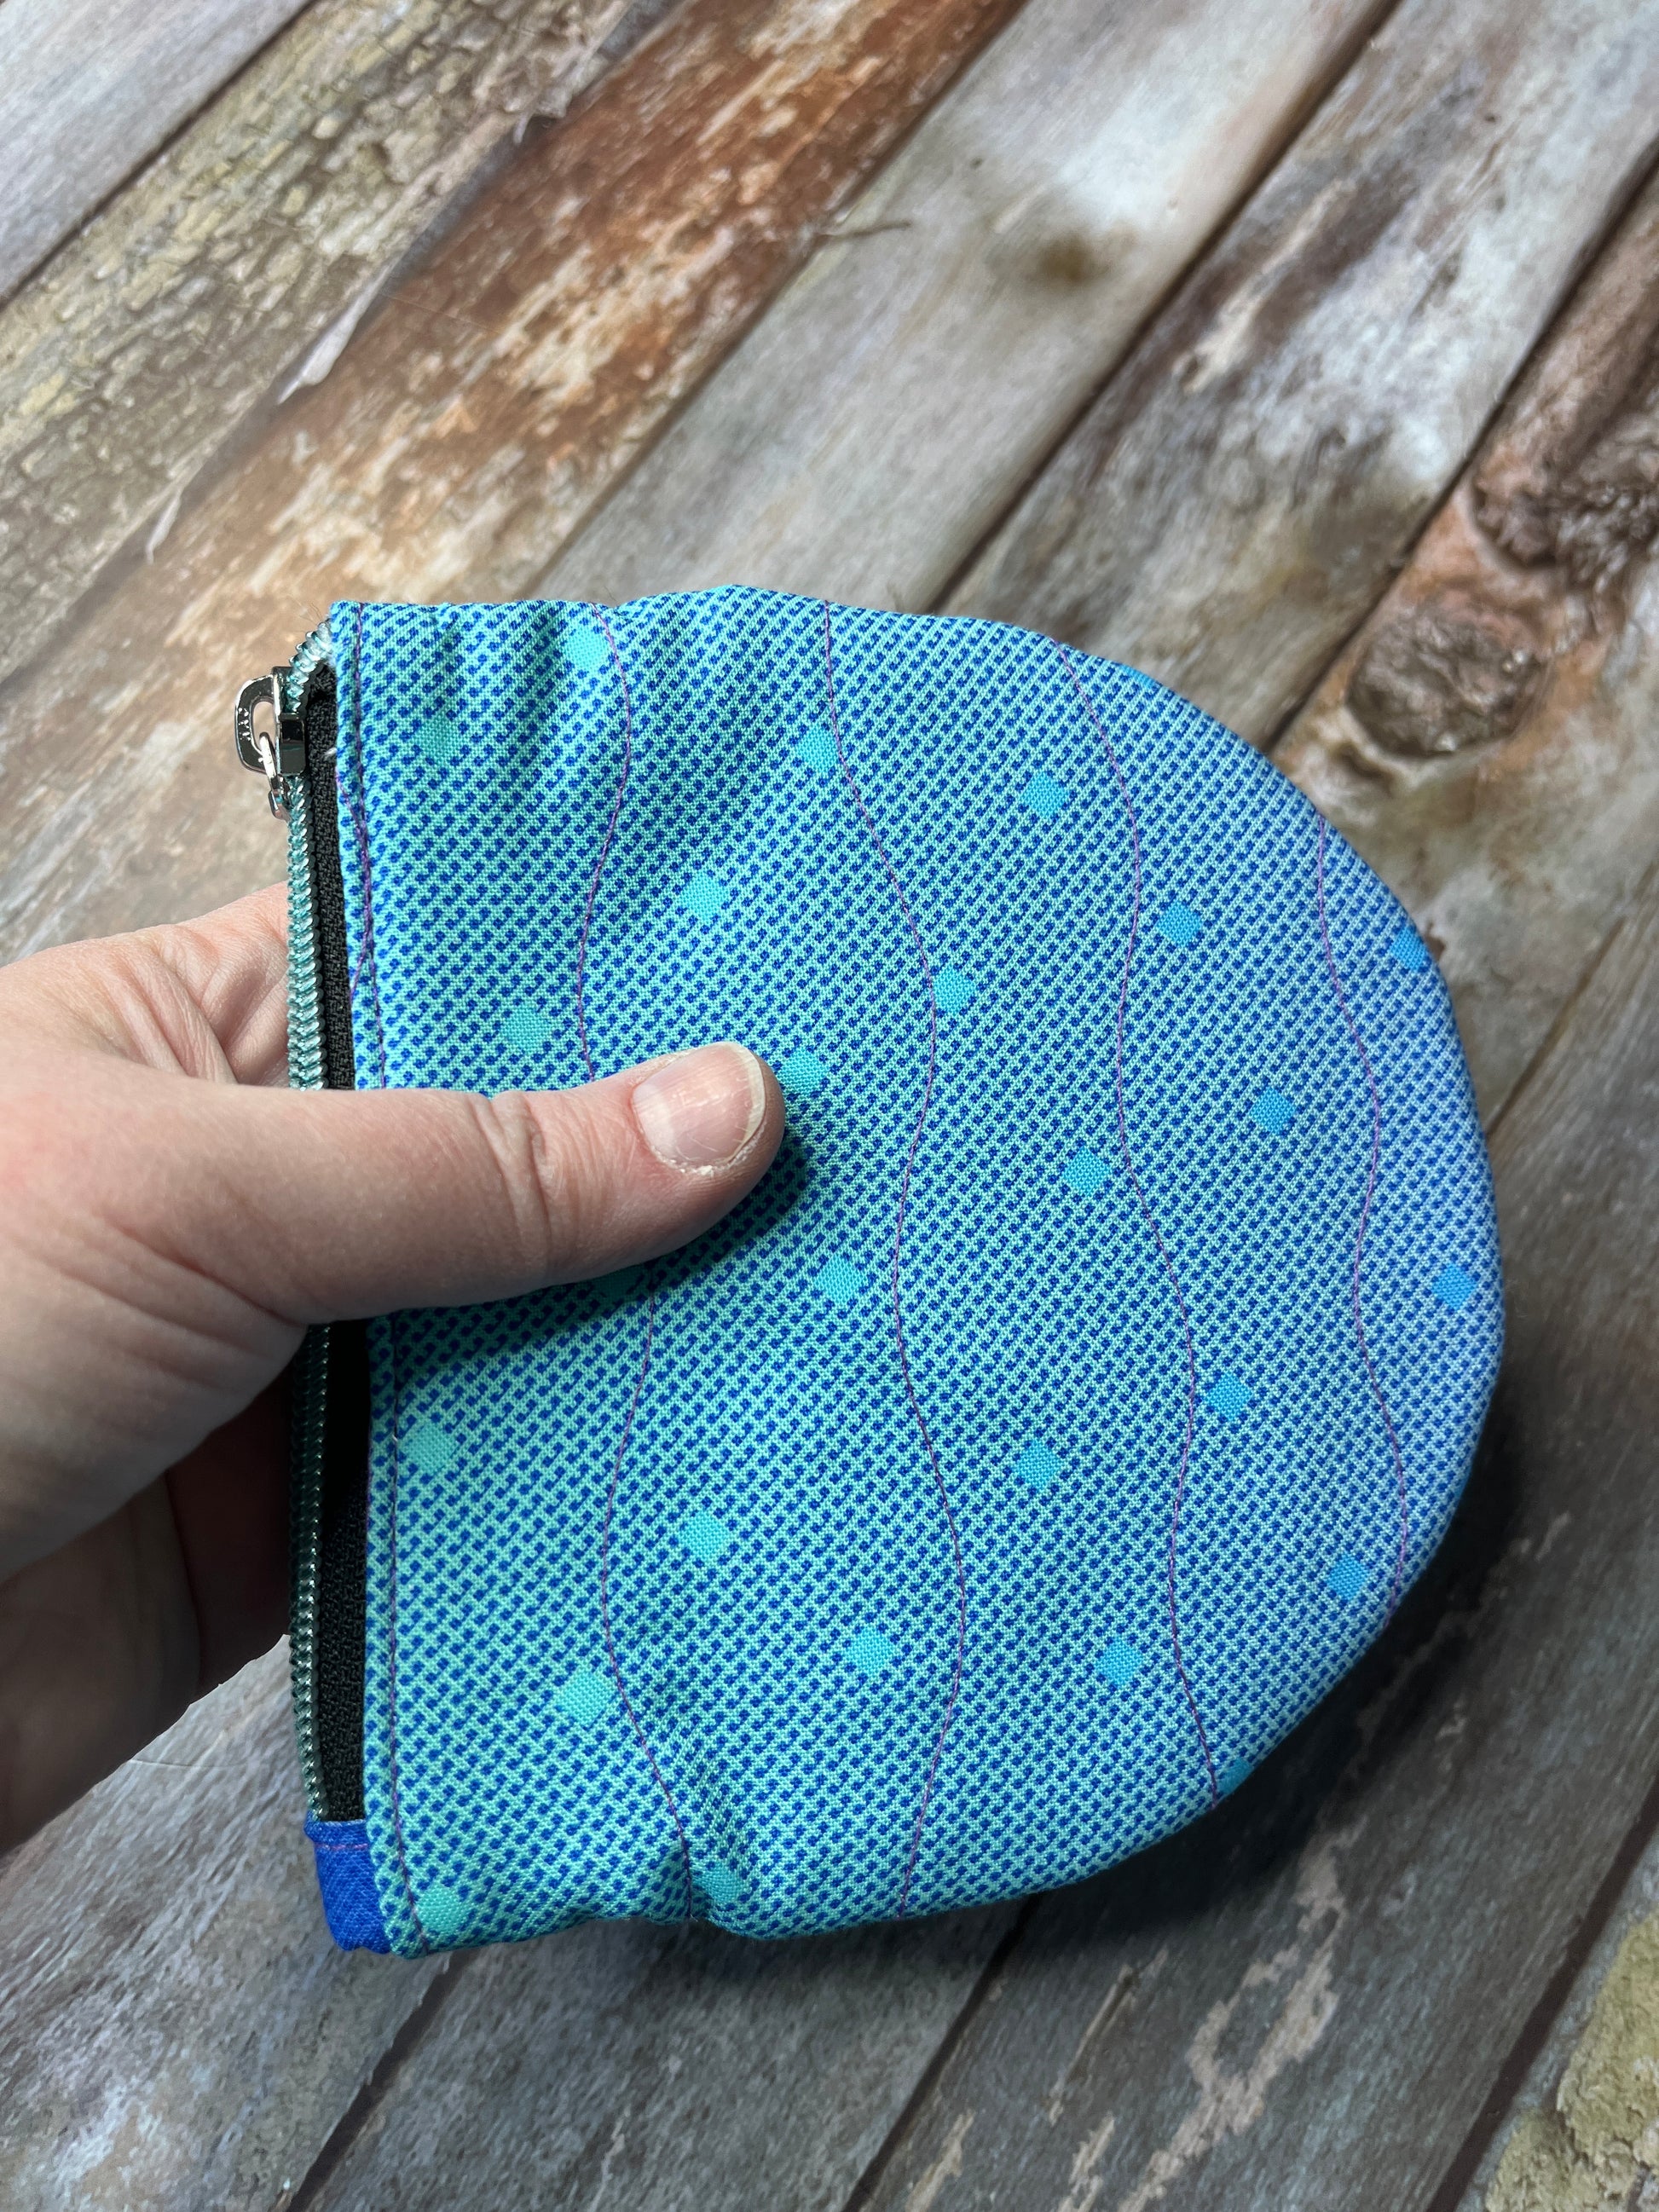 Purpe & Blue Patchwork Round Wing Zip Purse no2024-05 - Uphouse Crafts